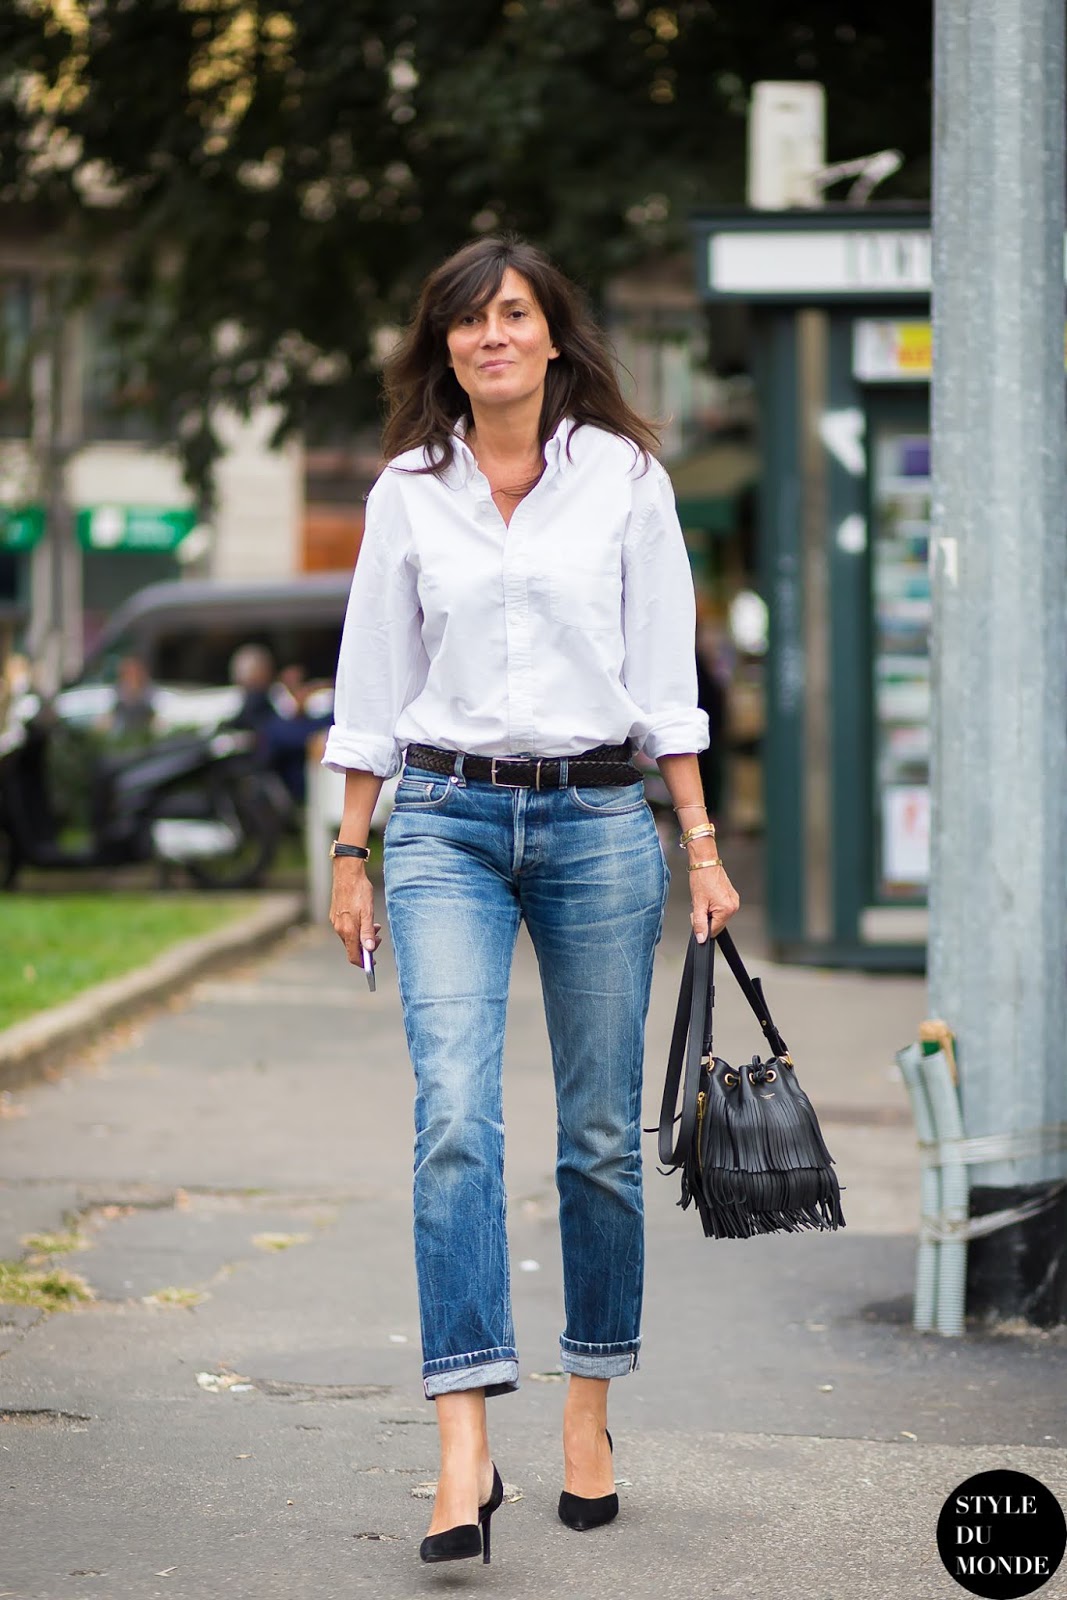 Wear These 3 Easy Basics for the Perfect French-Girl Outfit